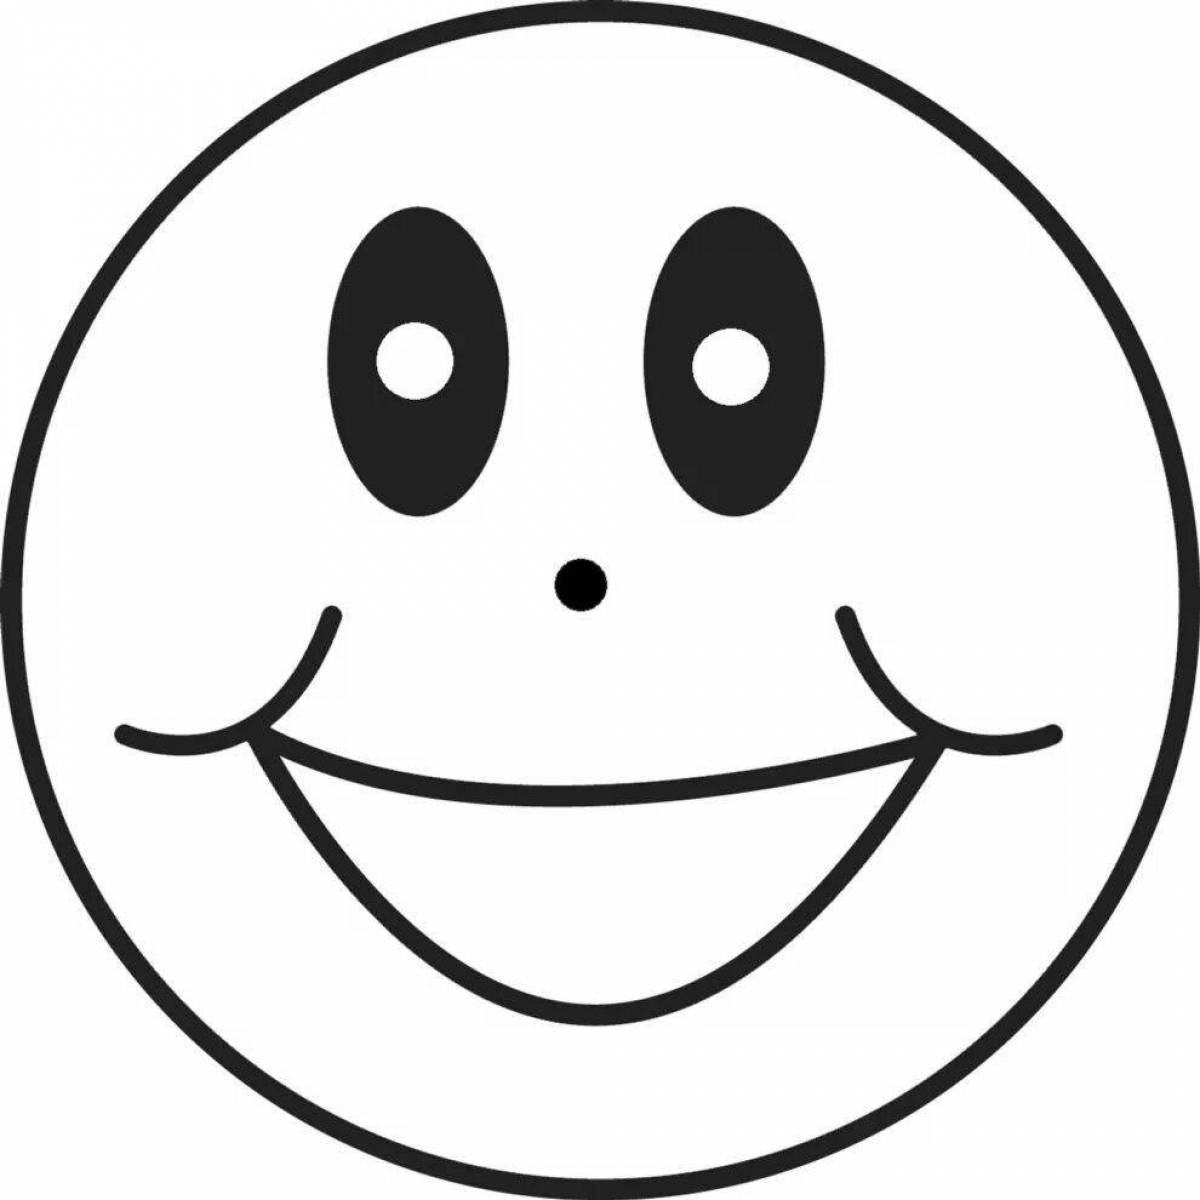 Glowing coloring page with smiley face